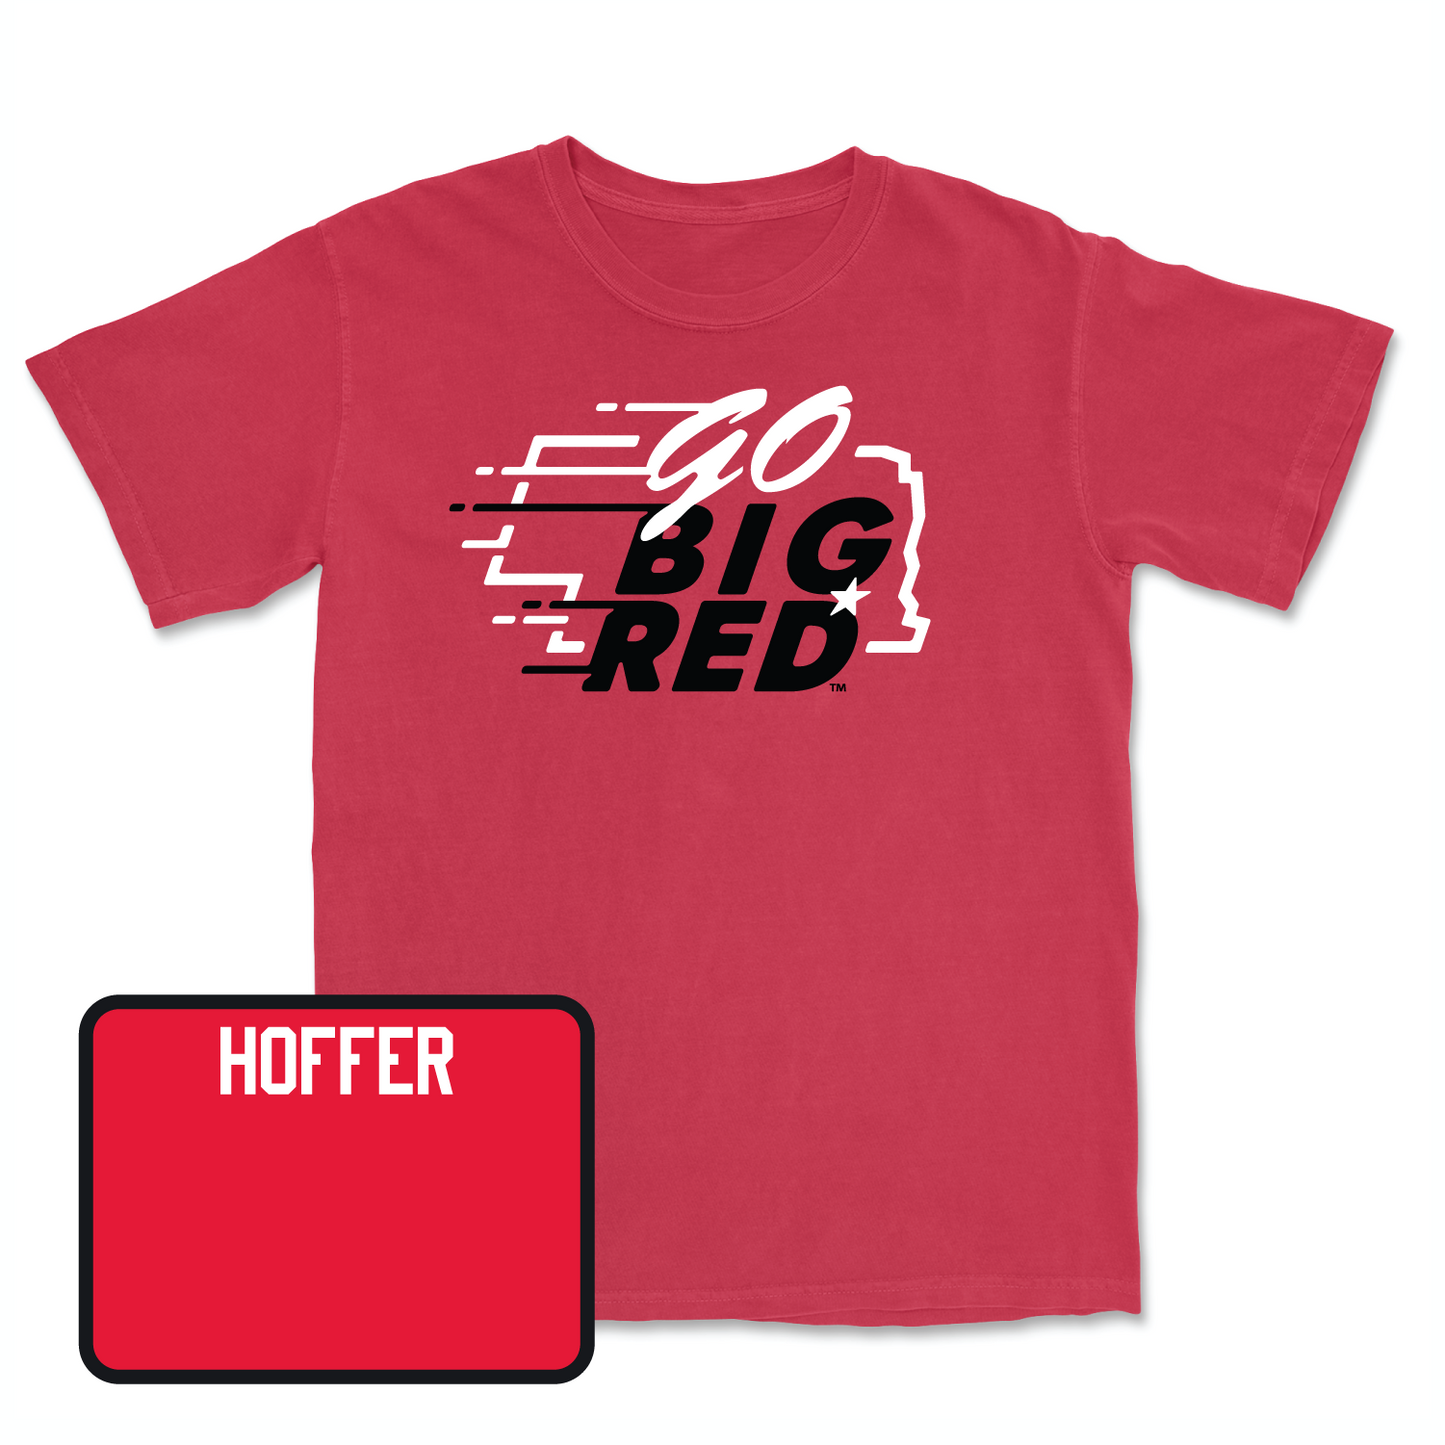 Red Track & Field GBR Tee X-Large / Michael Hoffer